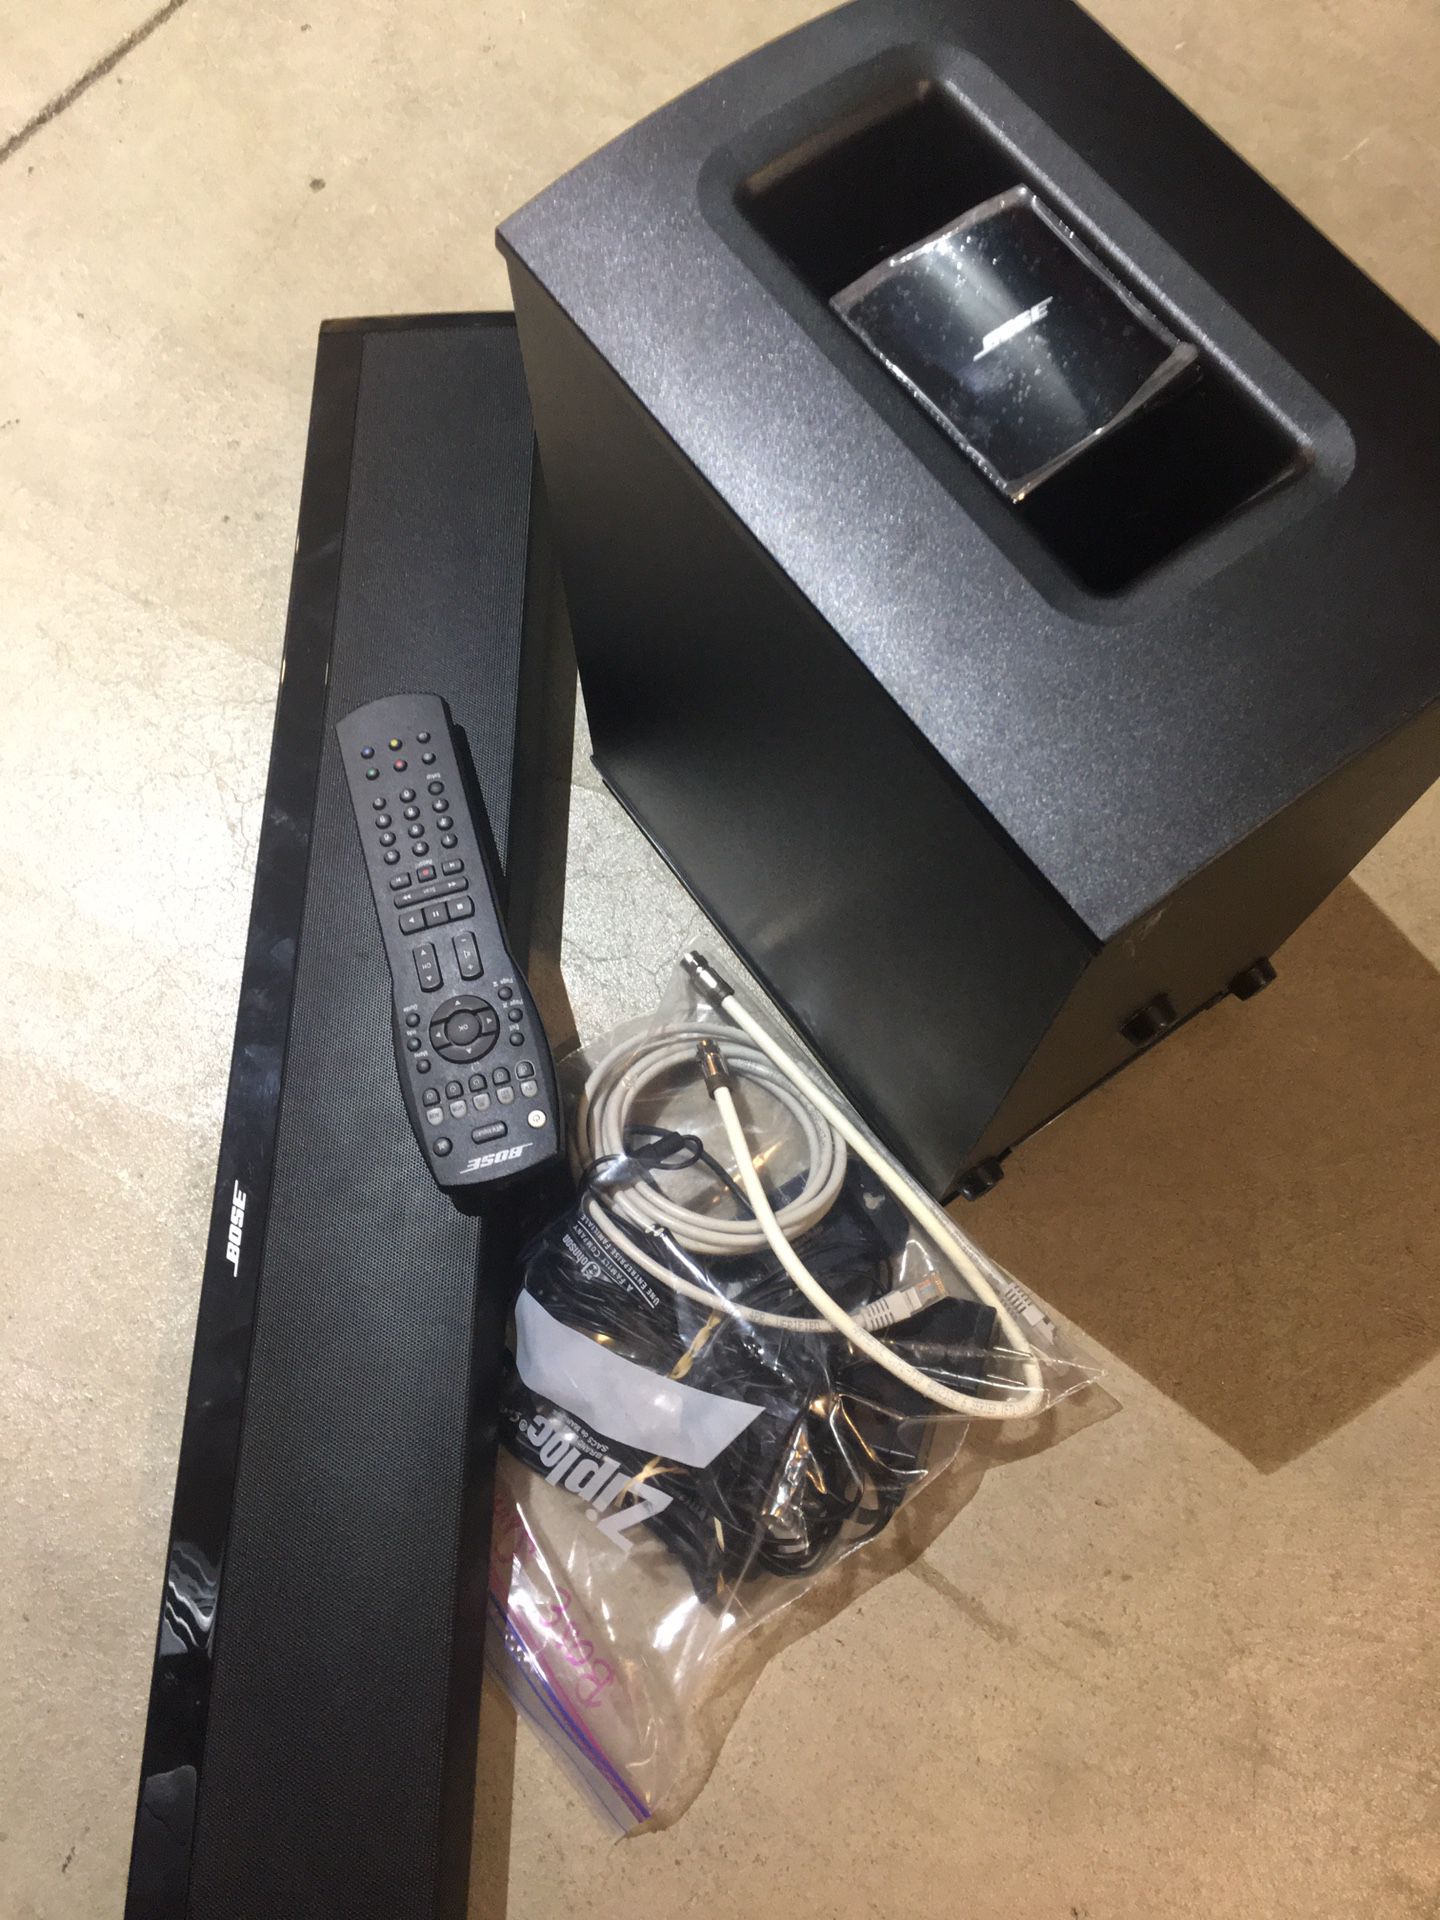 Bose CineMate 1 SR Home Theater Speaker System  with Remote and power cords